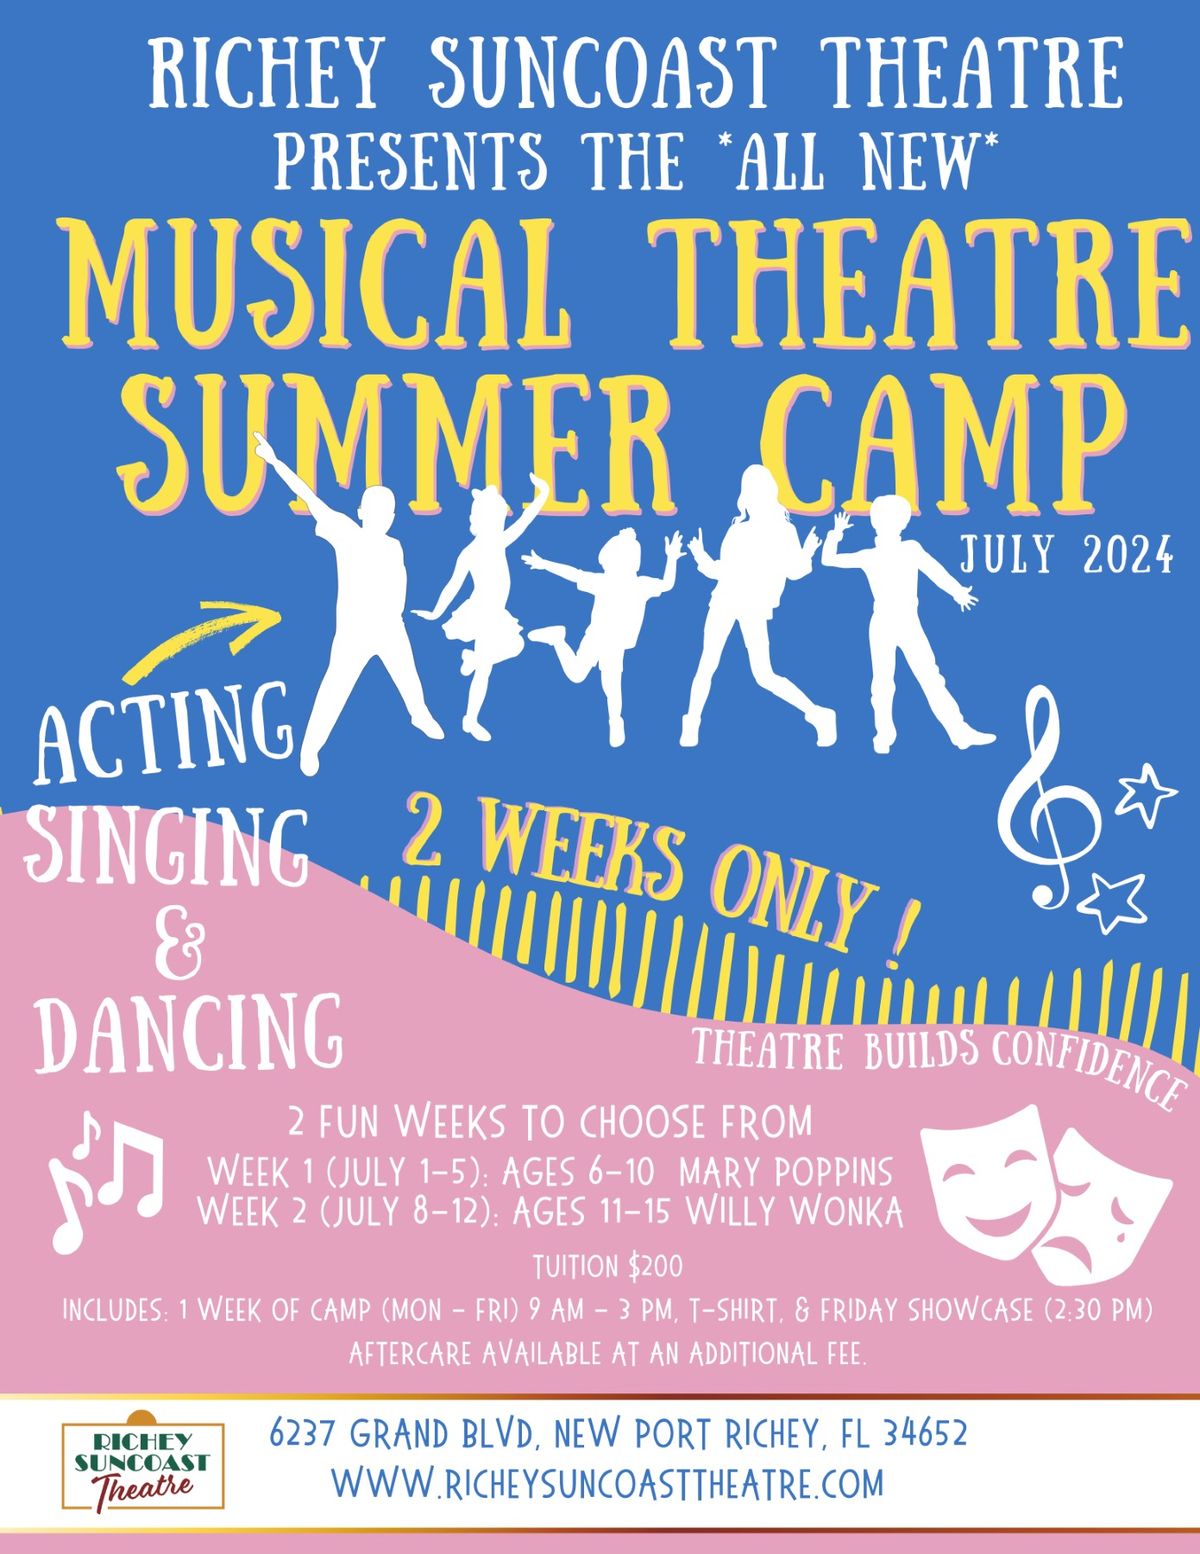 Richey Suncoast Musical Theatre Summer Camp - Ages 11-15 - July 8-12